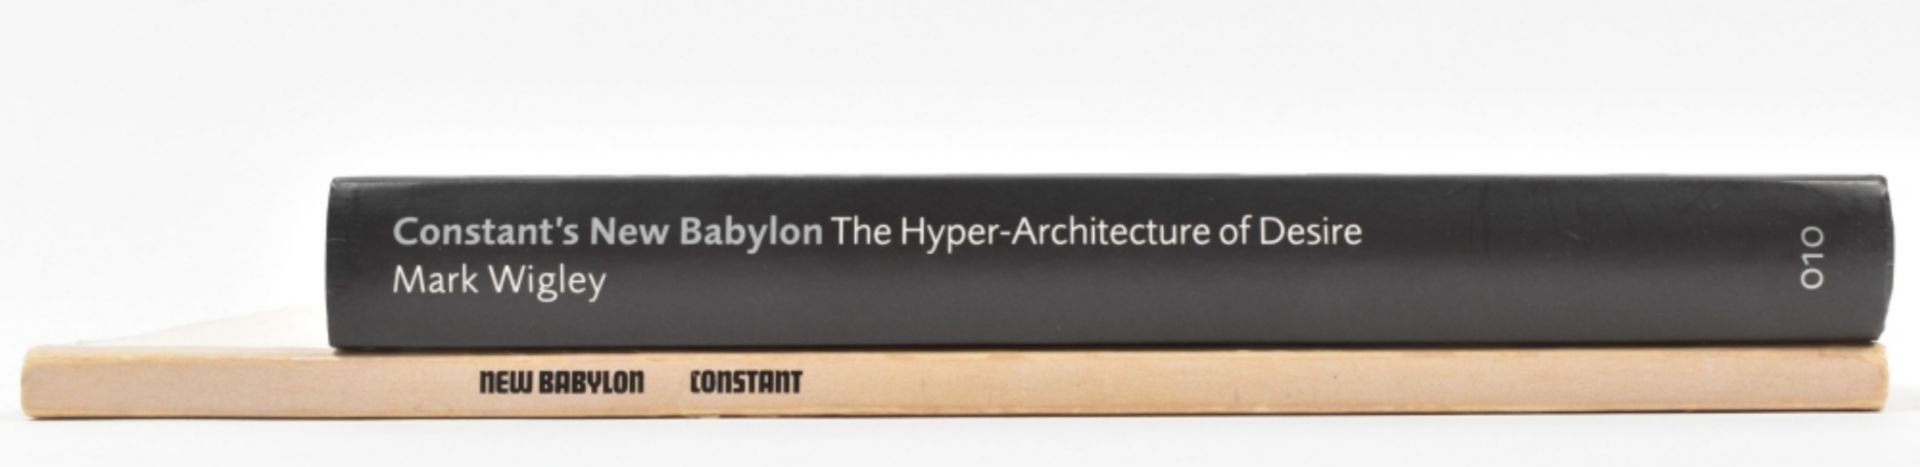 Two publications about Constant's New Babylon - Image 2 of 4